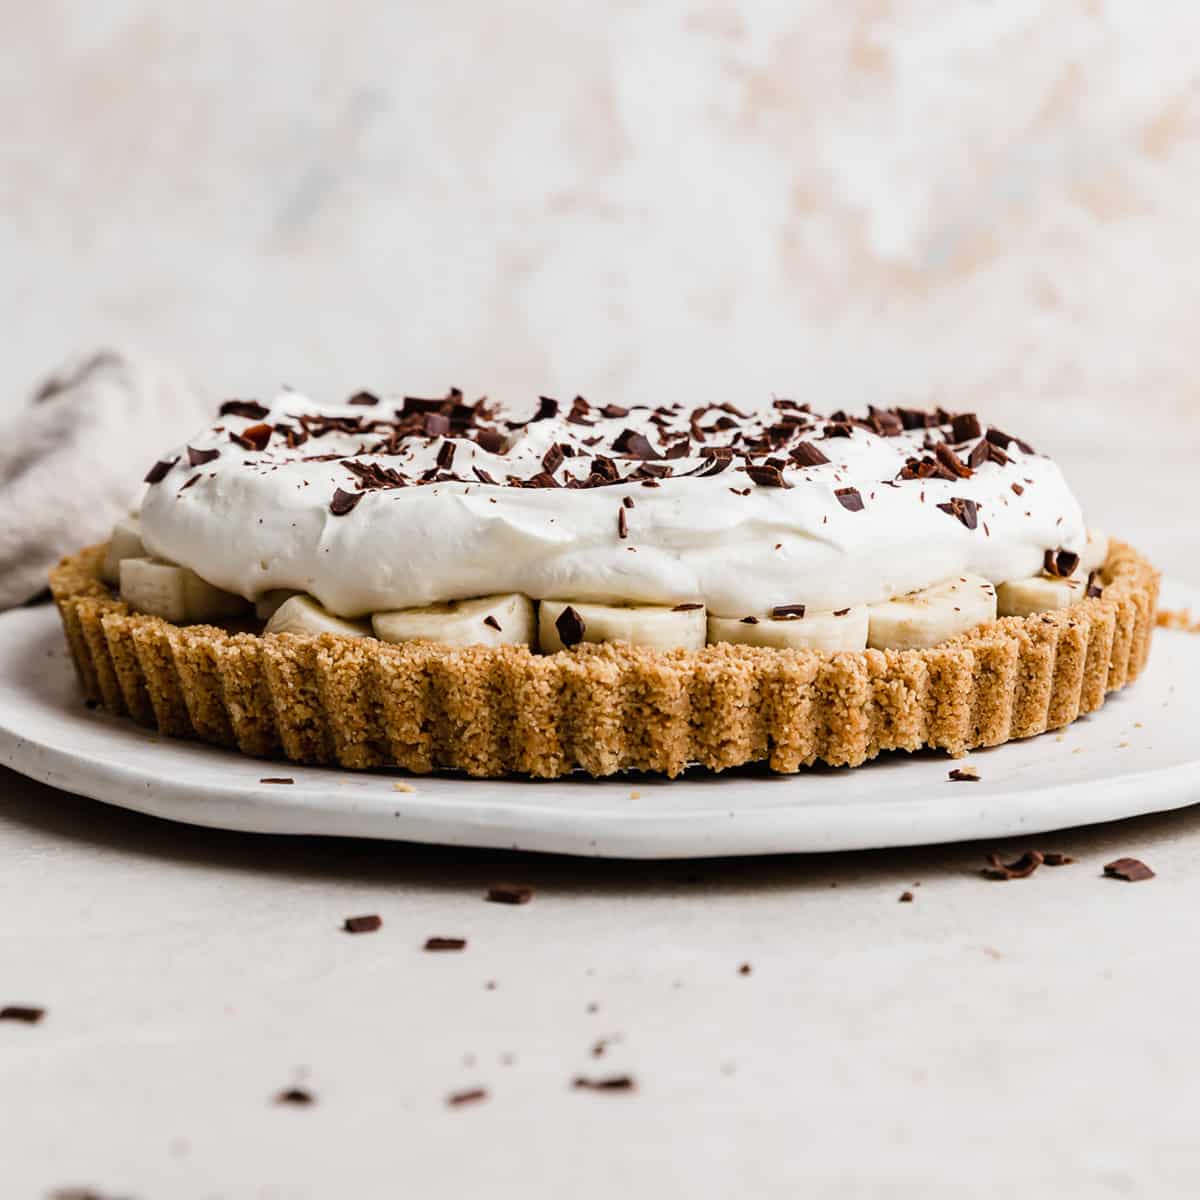 A Banoffee Pie on a white plate, topped with whipped cream and chocolate shavings.